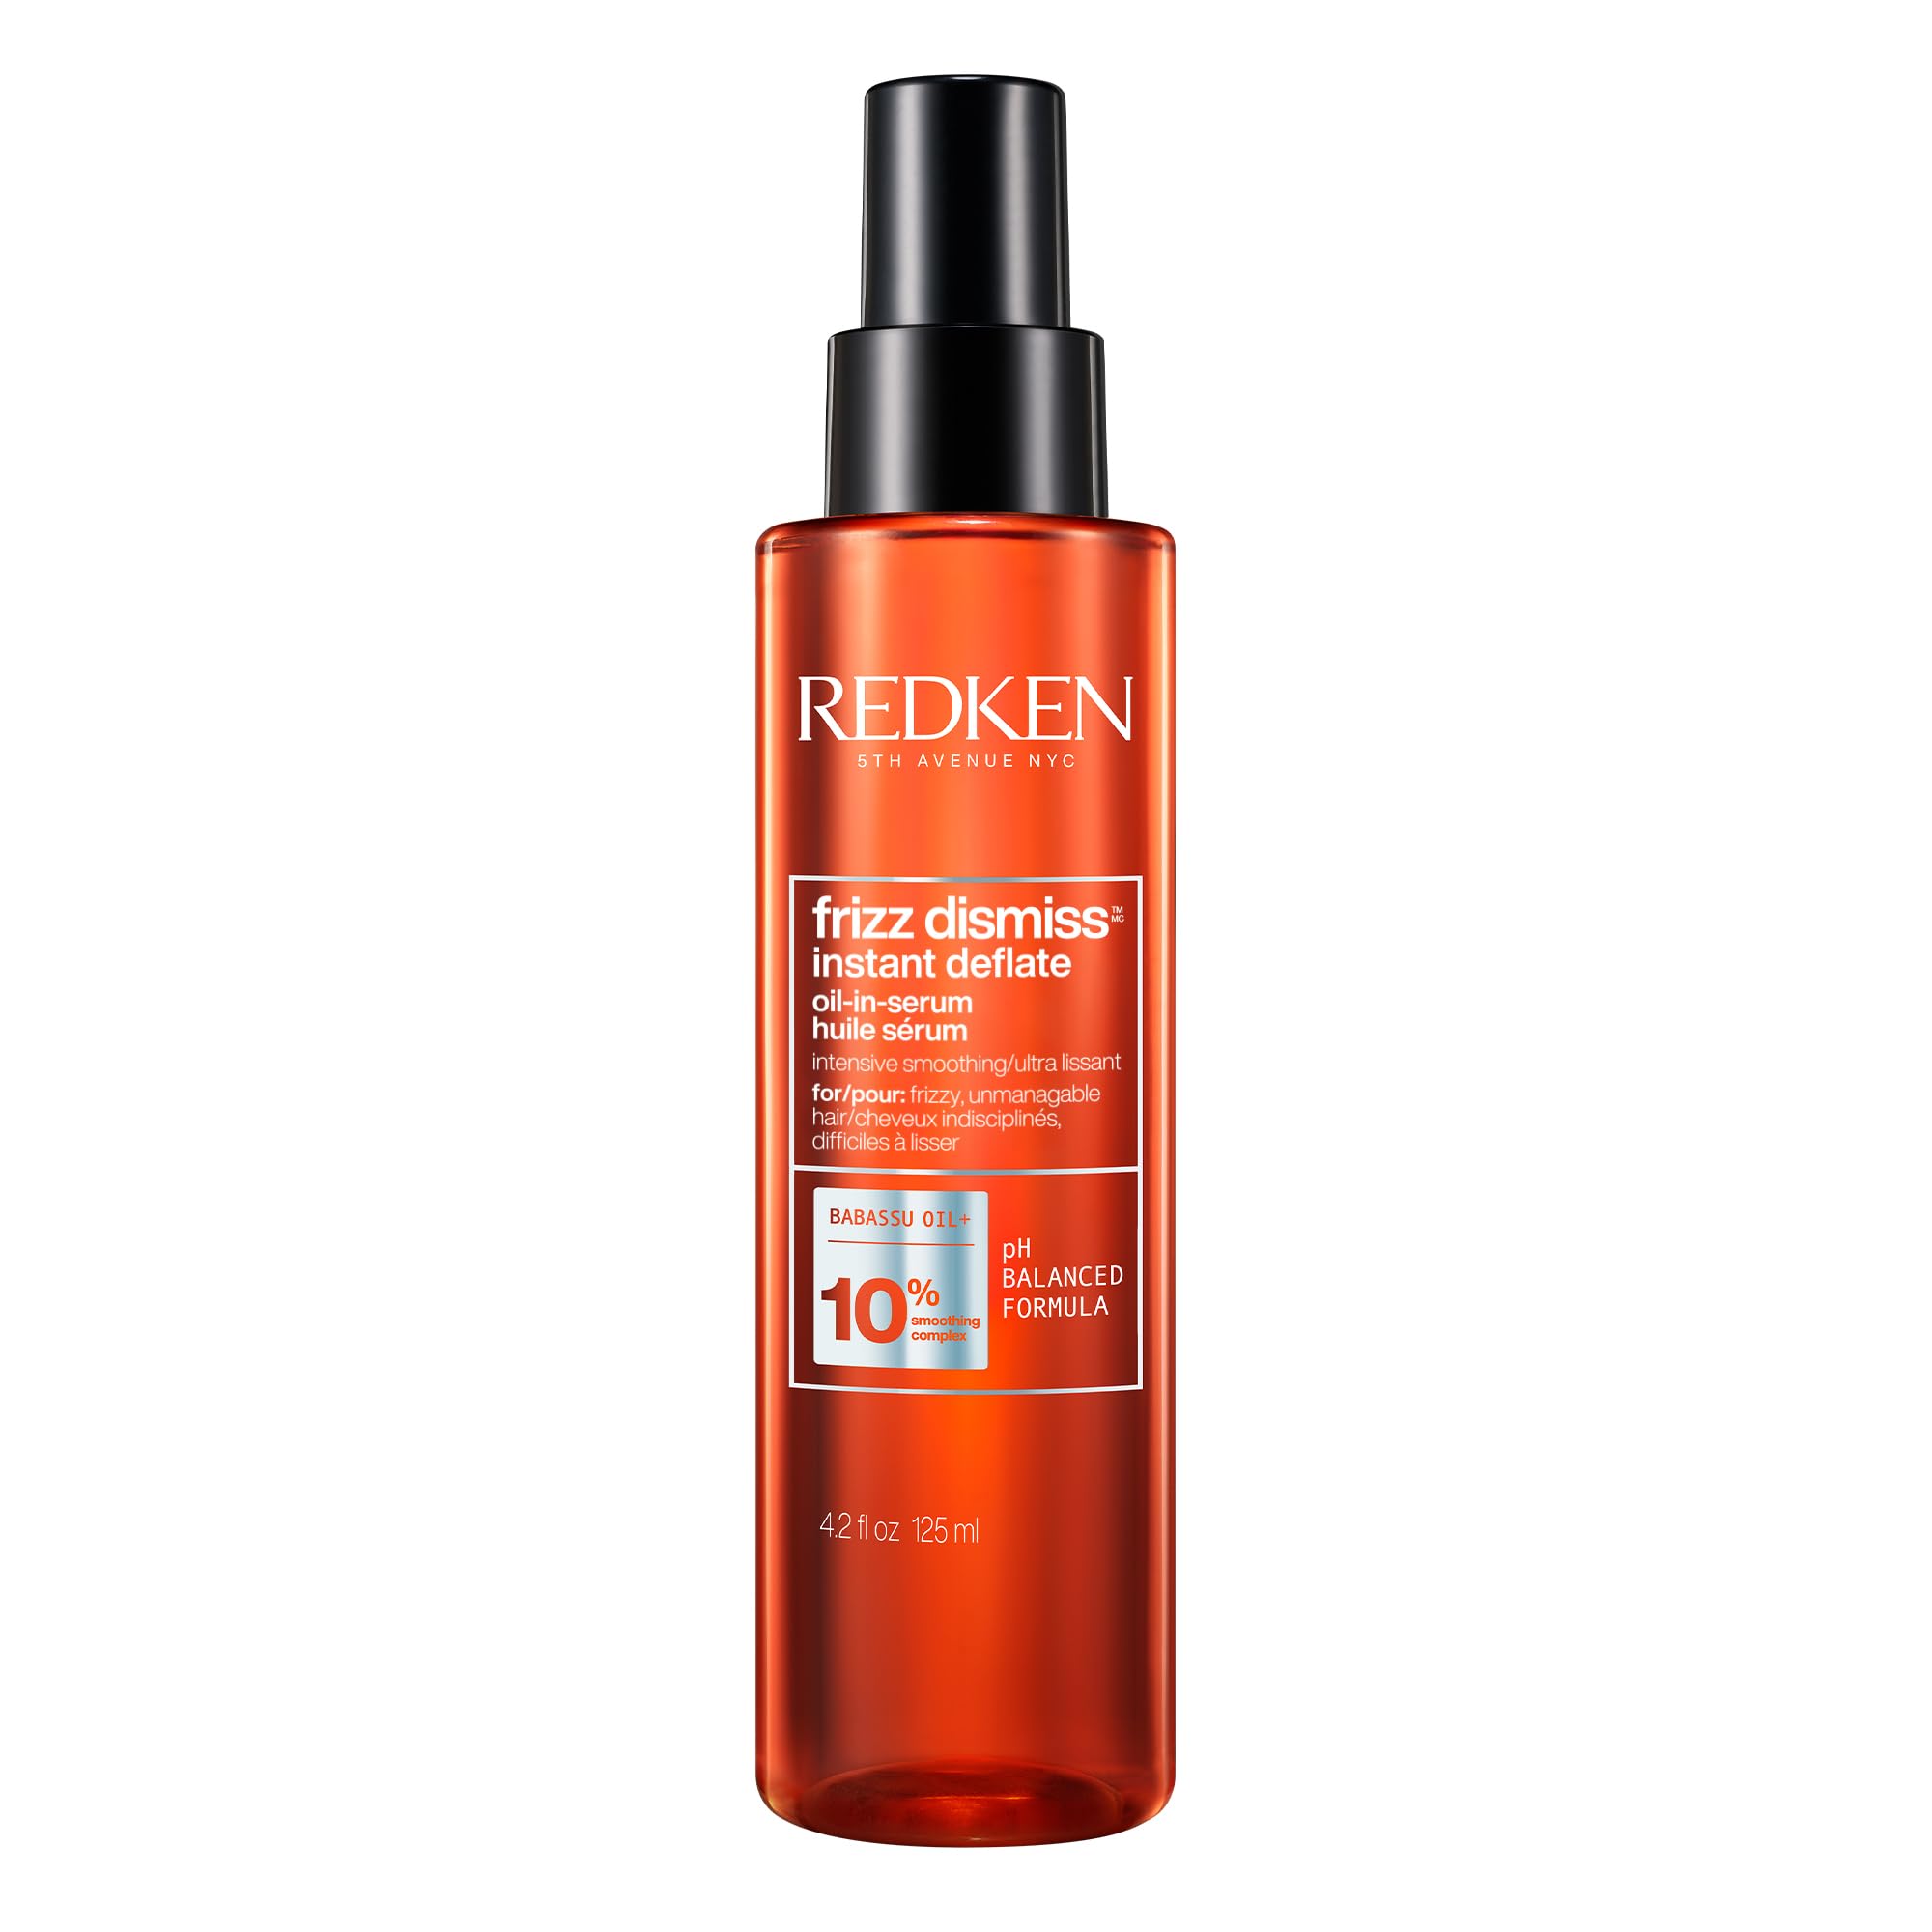 Redken Frizz Dismiss Instant Deflate Oil-In-Serum | For Frizzy Hair | Enhances Smoothness & Shine | With Babassu Oil